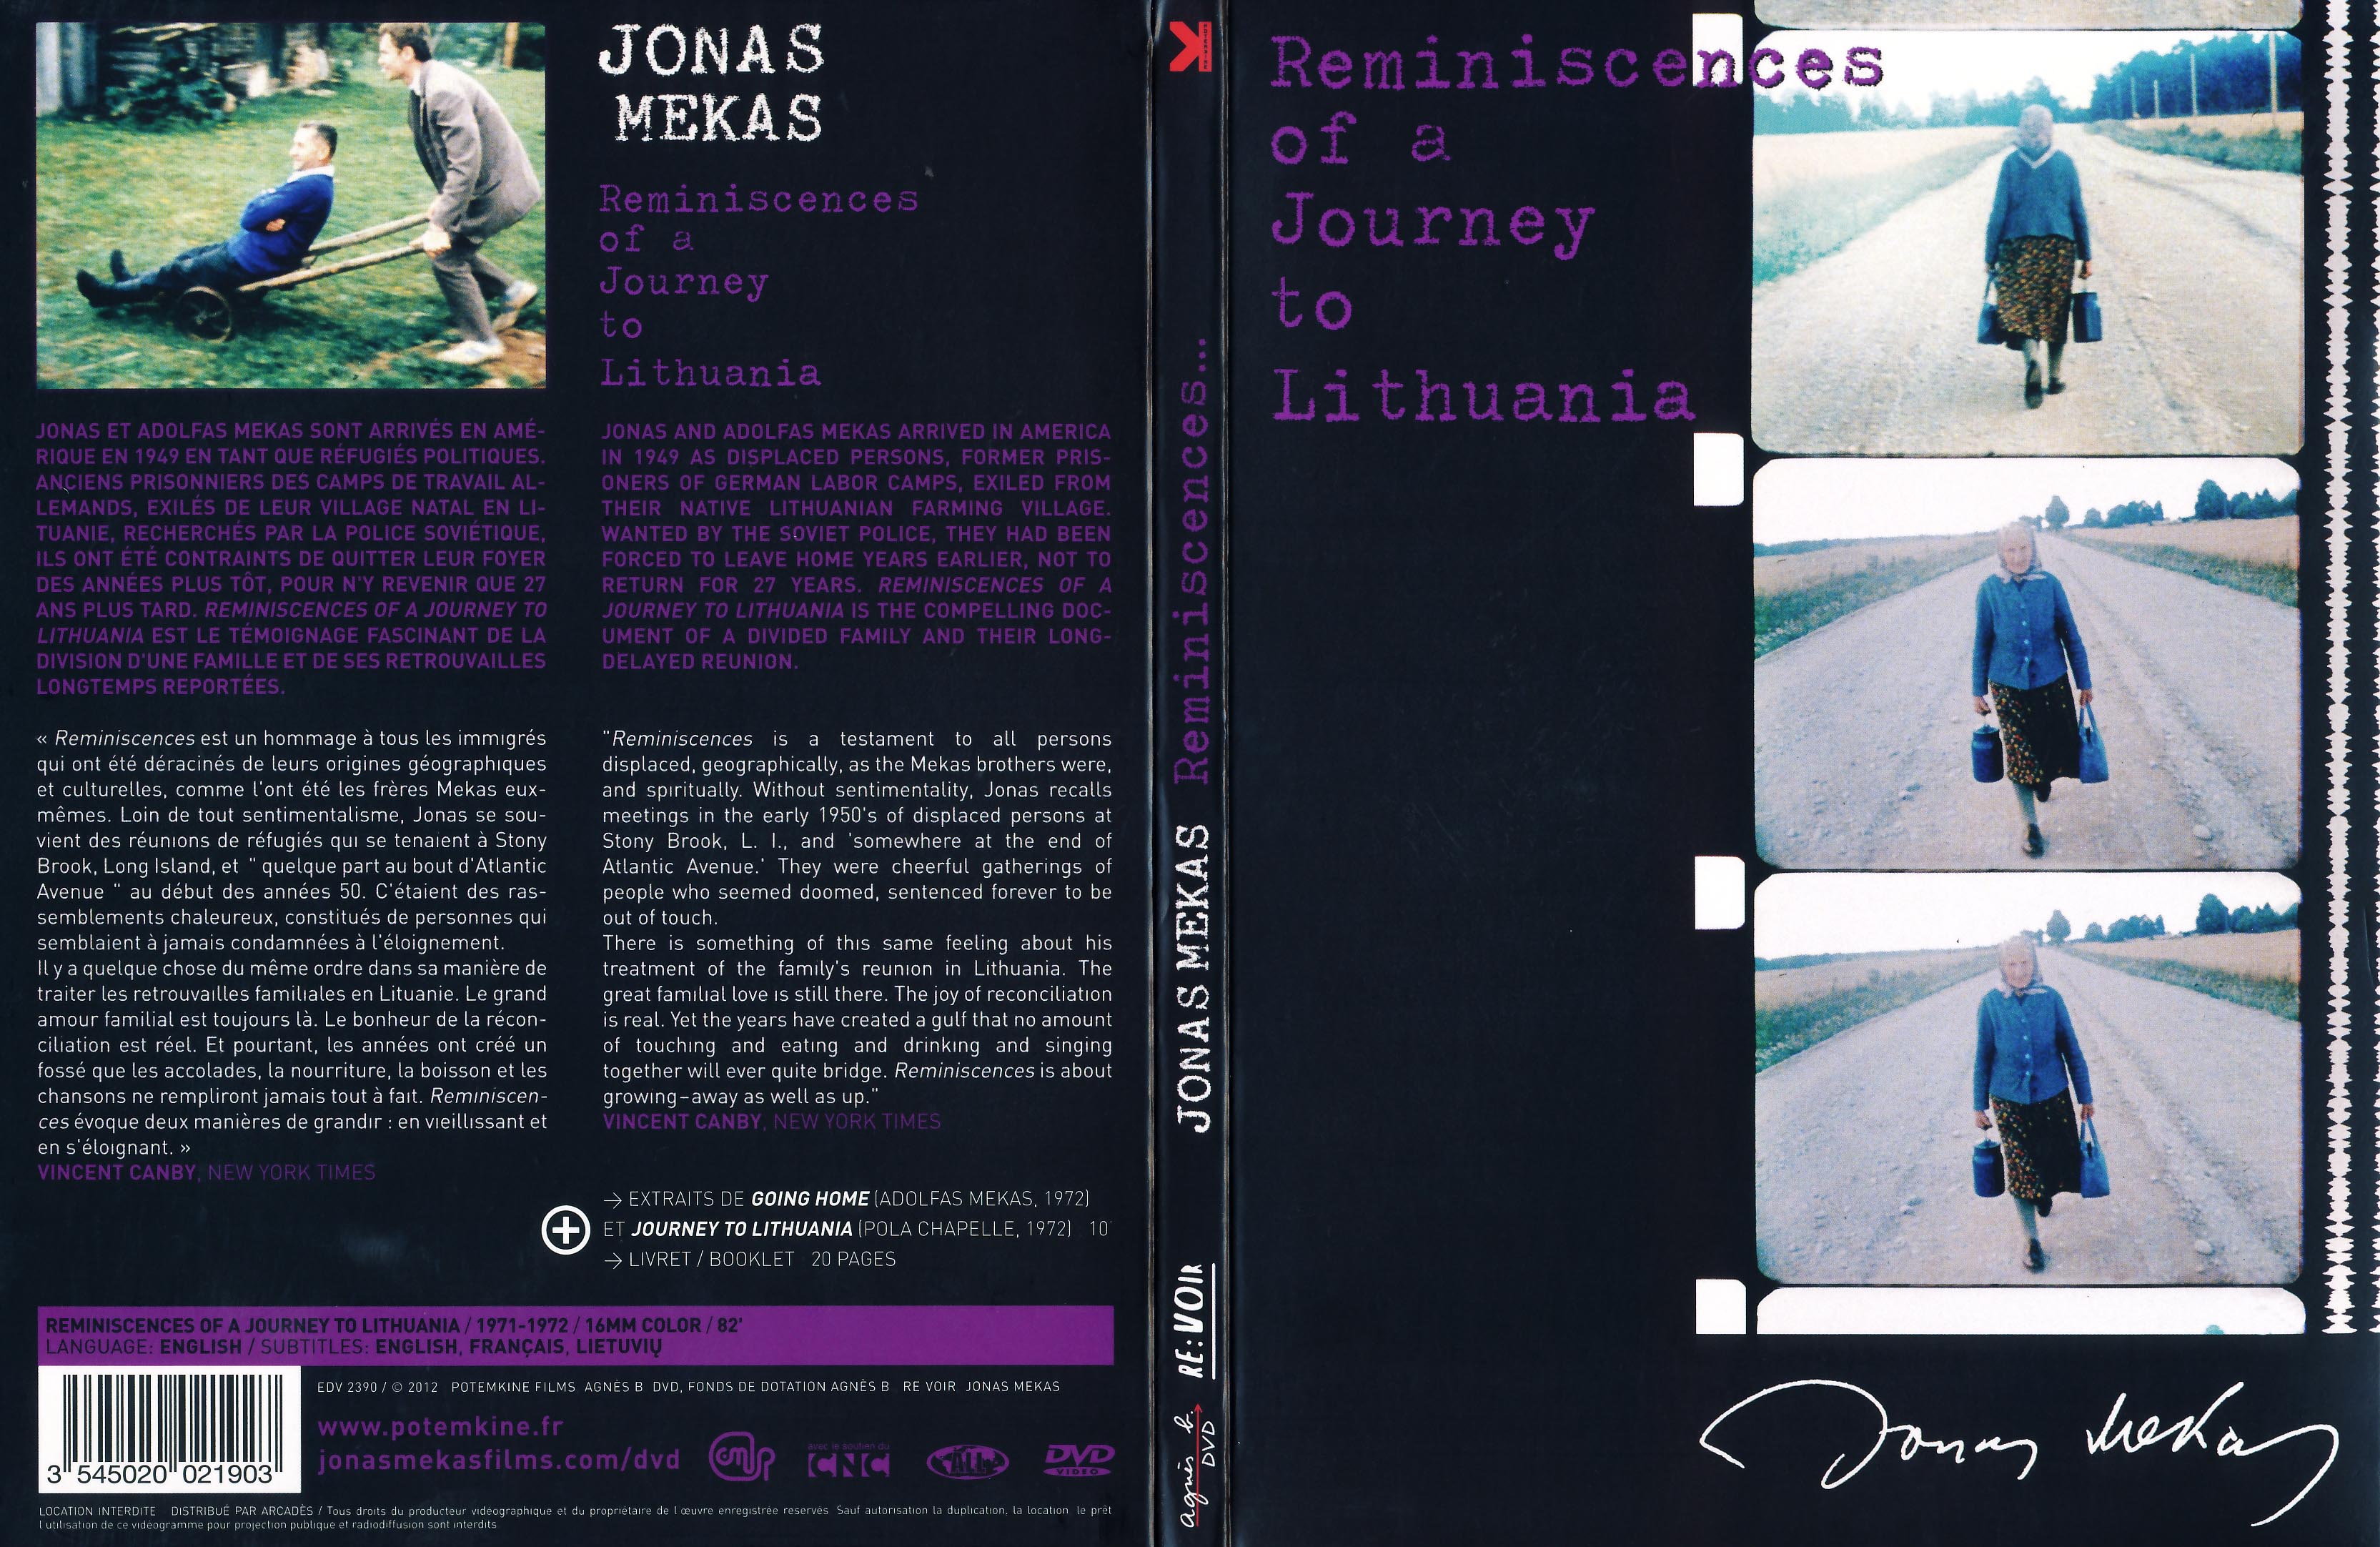 Jaquette DVD Reminiscences of a journey to lithuania